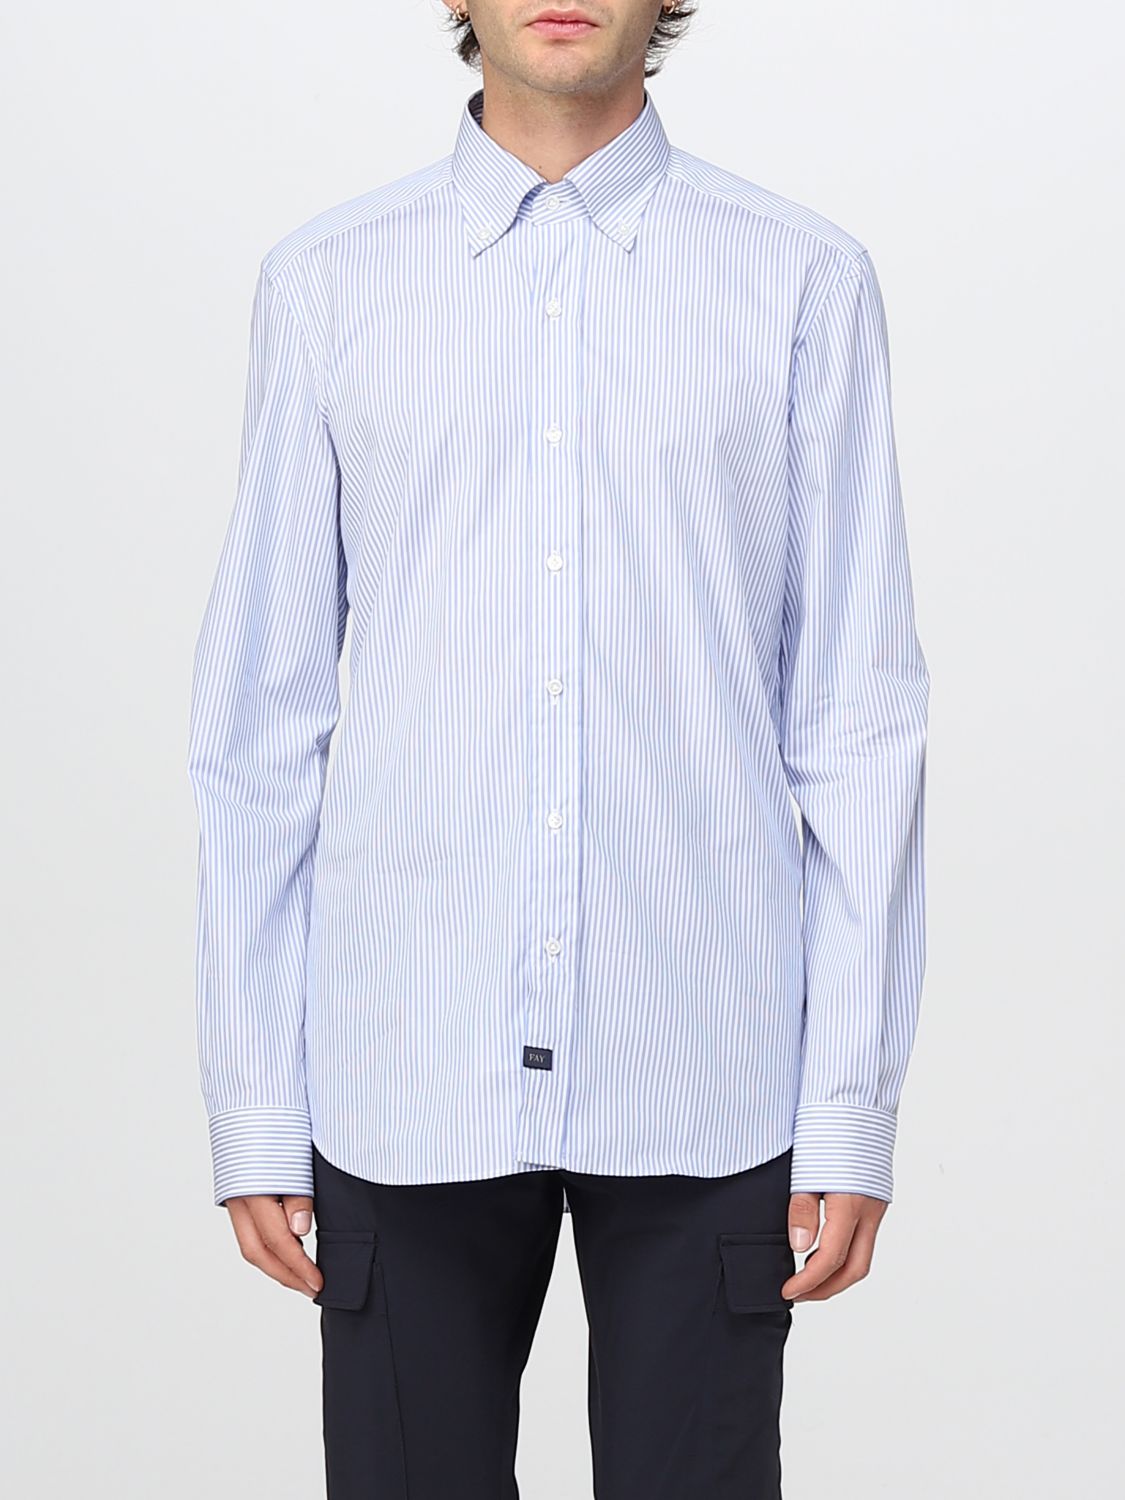 Fay Outlet: shirt for man - Avion | Fay shirt NCMA1452580UMF online on ...